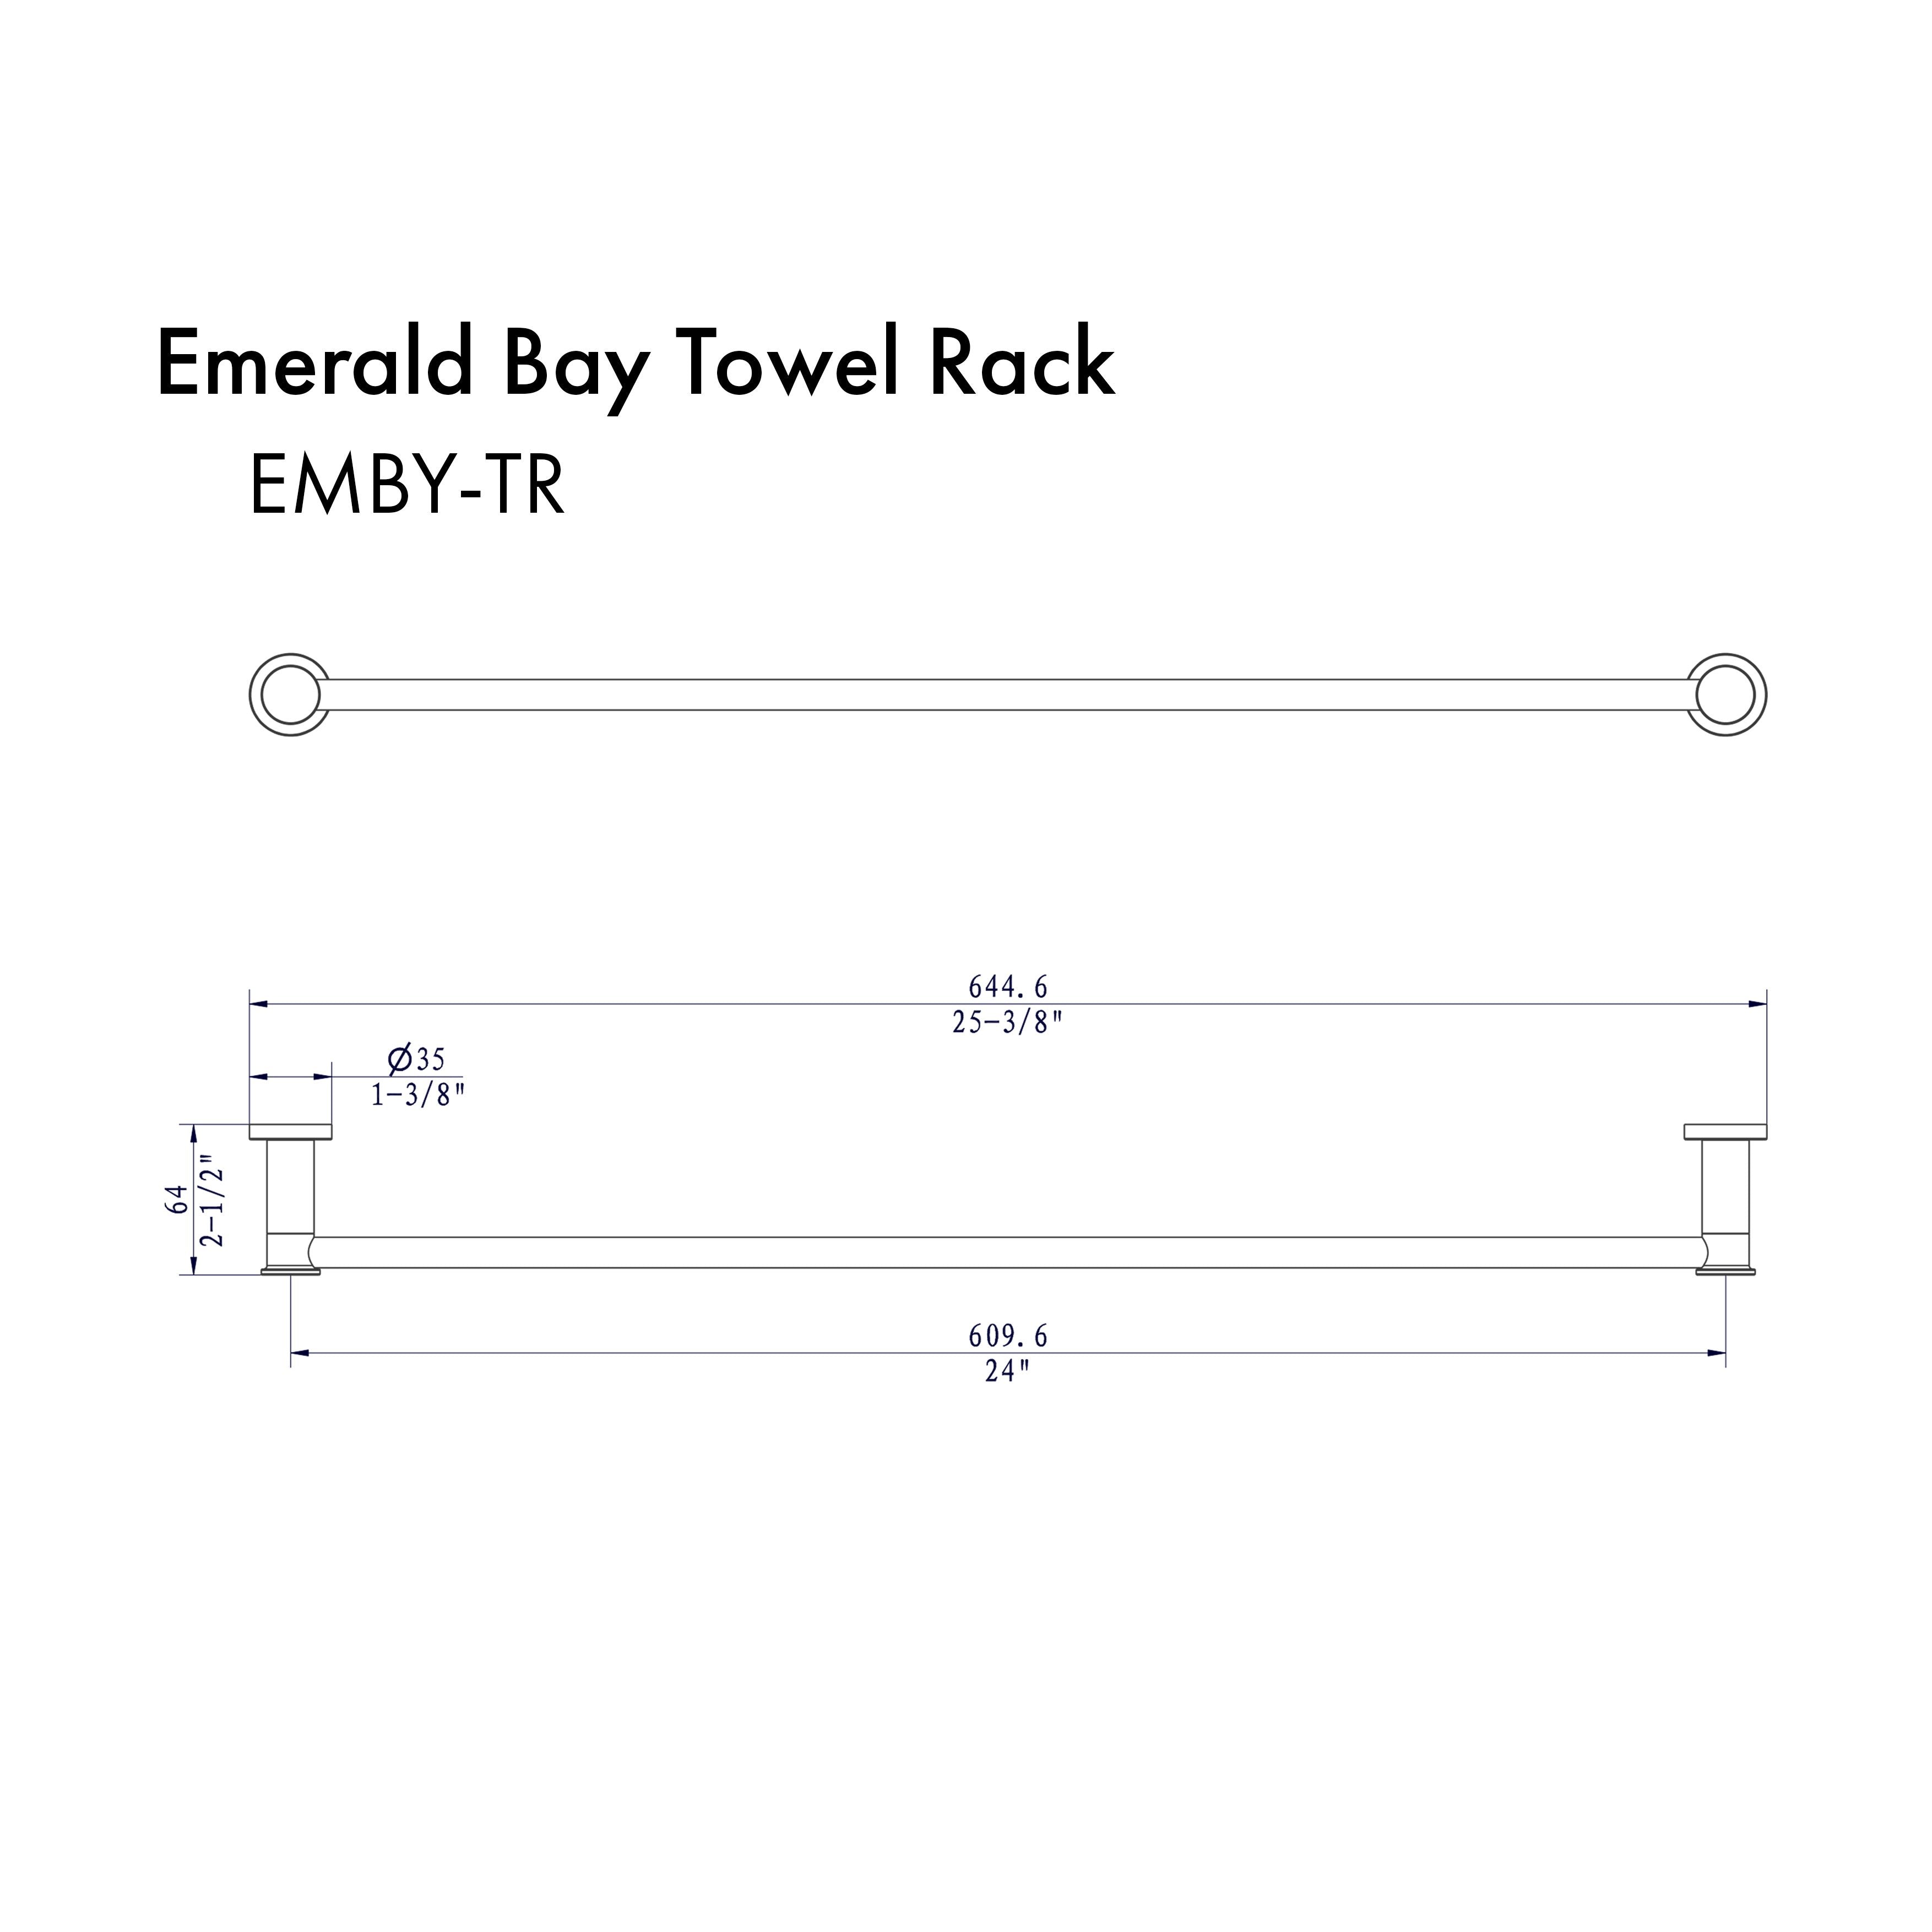 Therangehoodstore.com, ZLINE Emerald Bay Towel Rail with color options (EMBY-TR), EMBY-TR-BN,